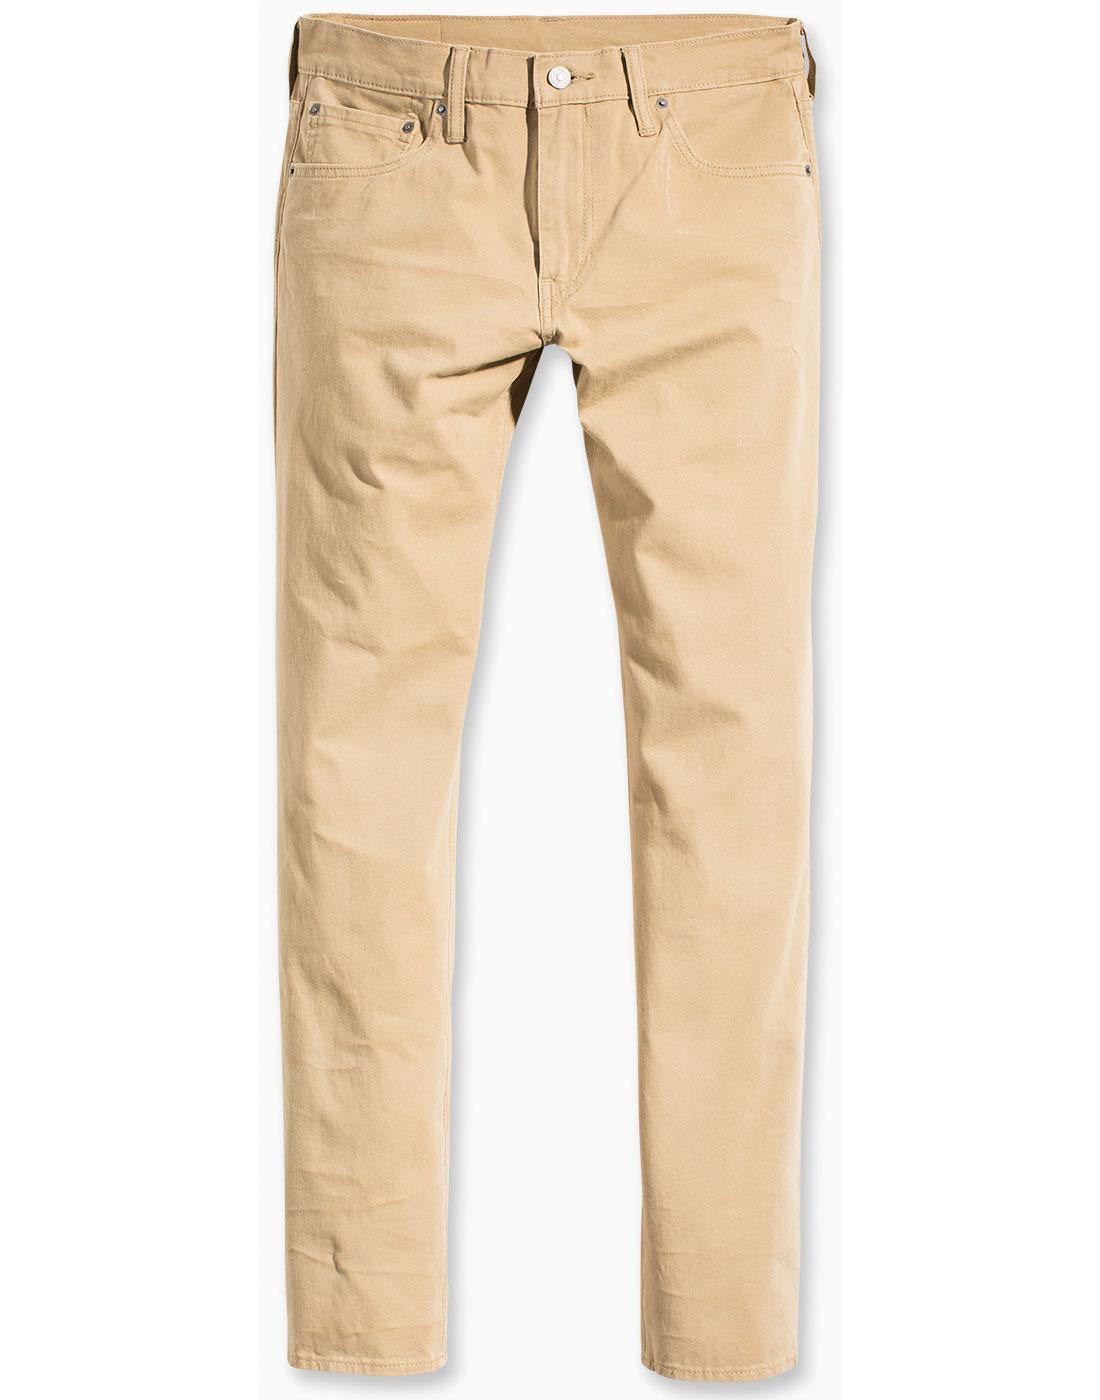 Slim Fit Chinos in Harvest Gold